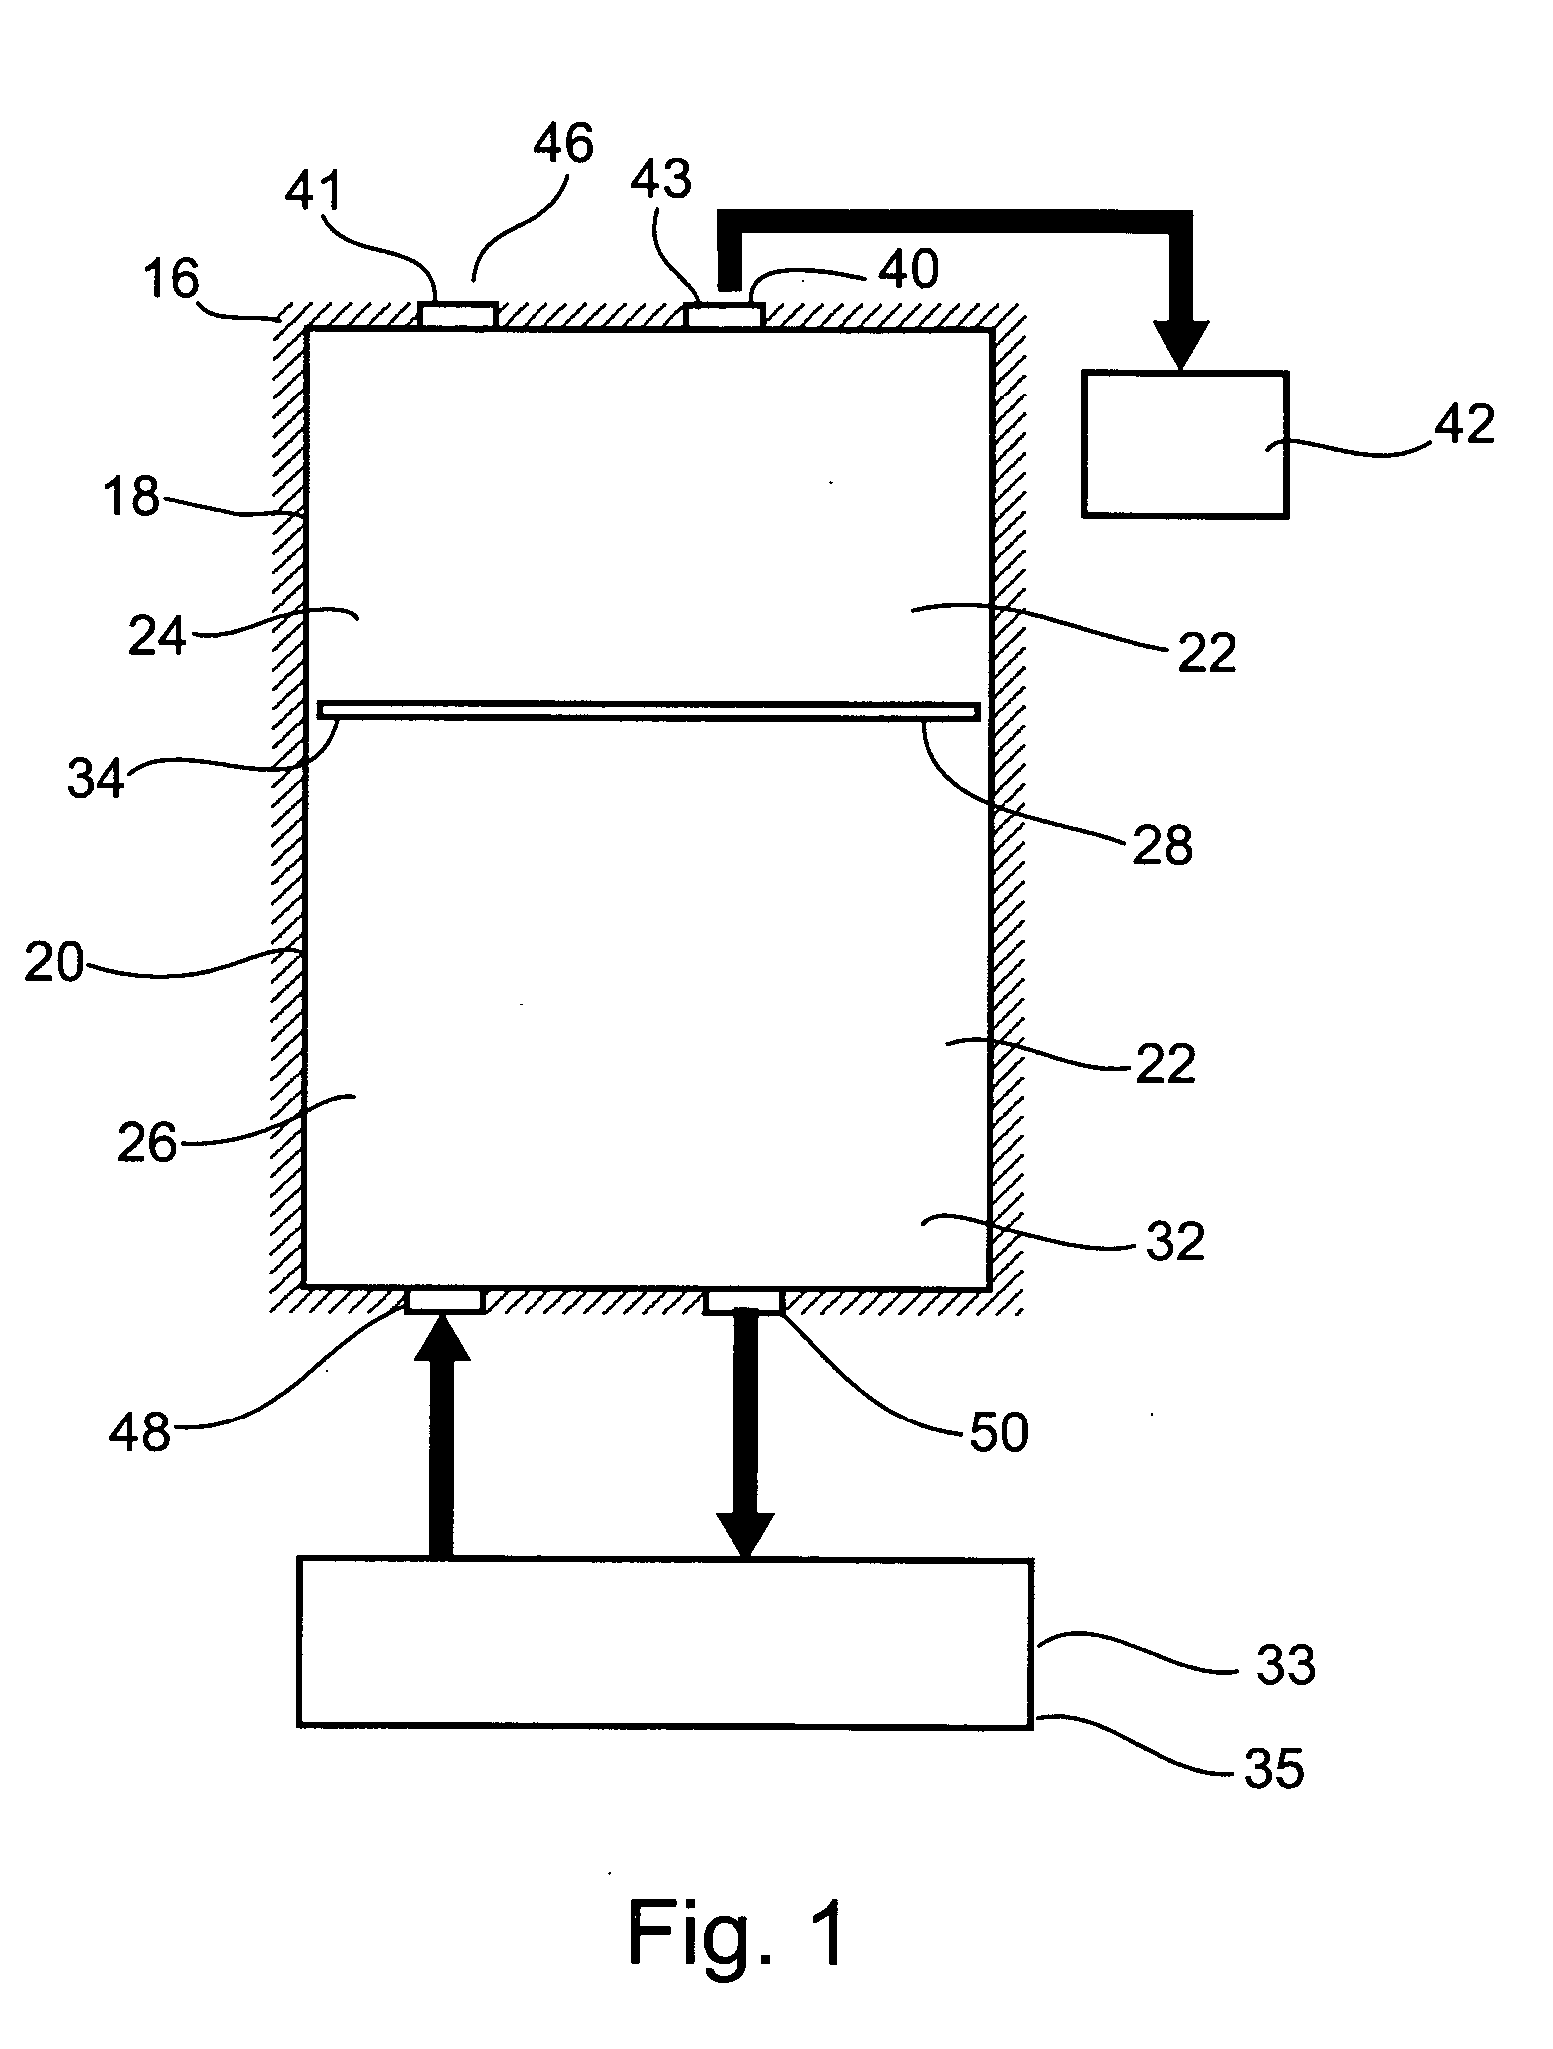 Apparatus and method for compressing a gas, and cryosurgery system and method utilizing same